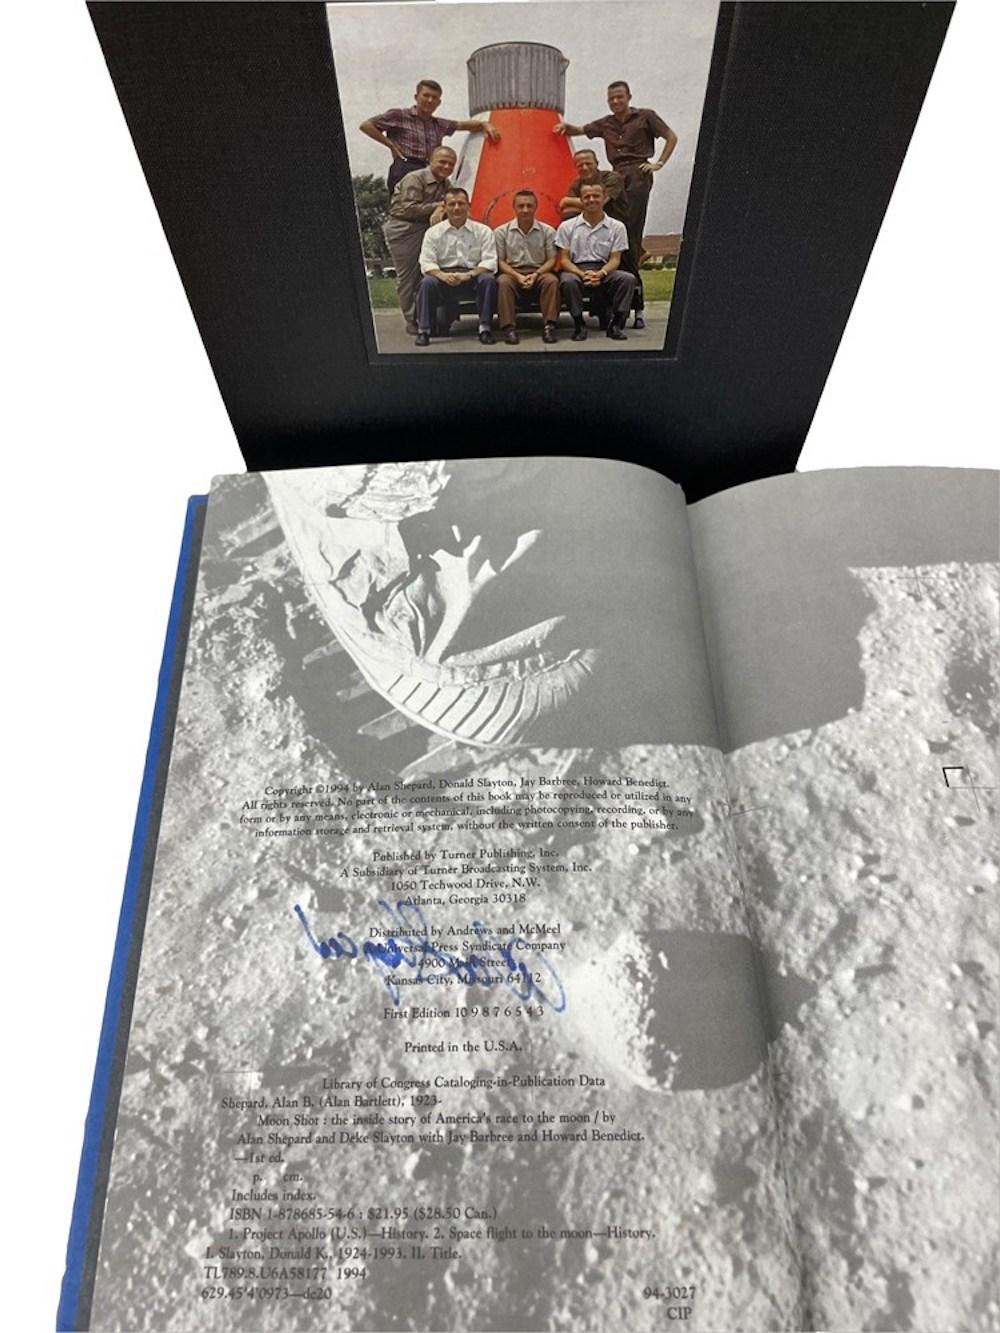 Modern Moon Shot, By Alan Shepard and Deke Slayton, Signed by Shepard, First Edition 